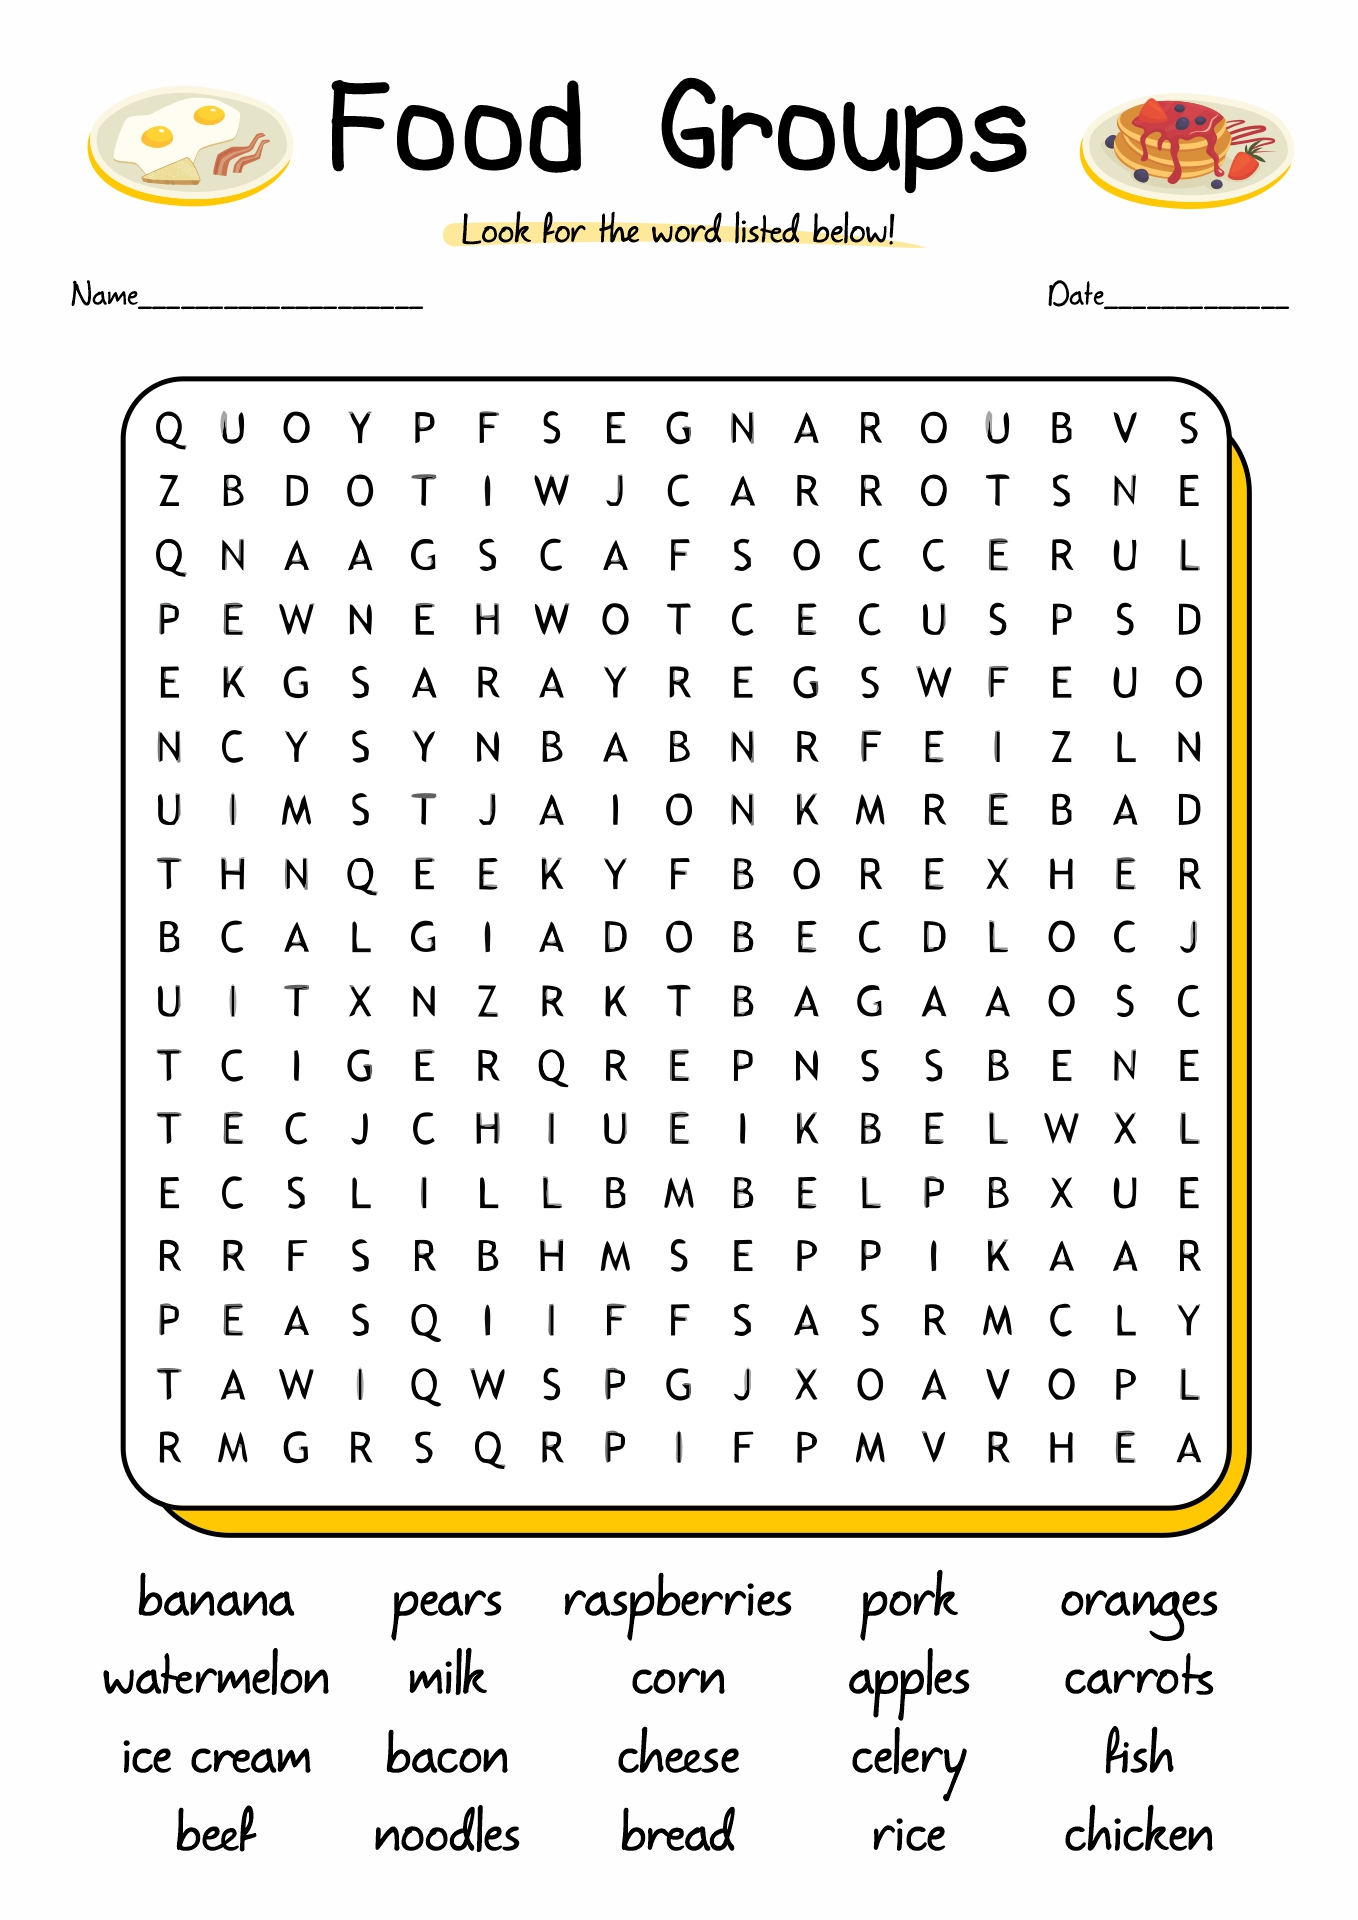 Five Food Groups Pyramid Word Search Worksheets